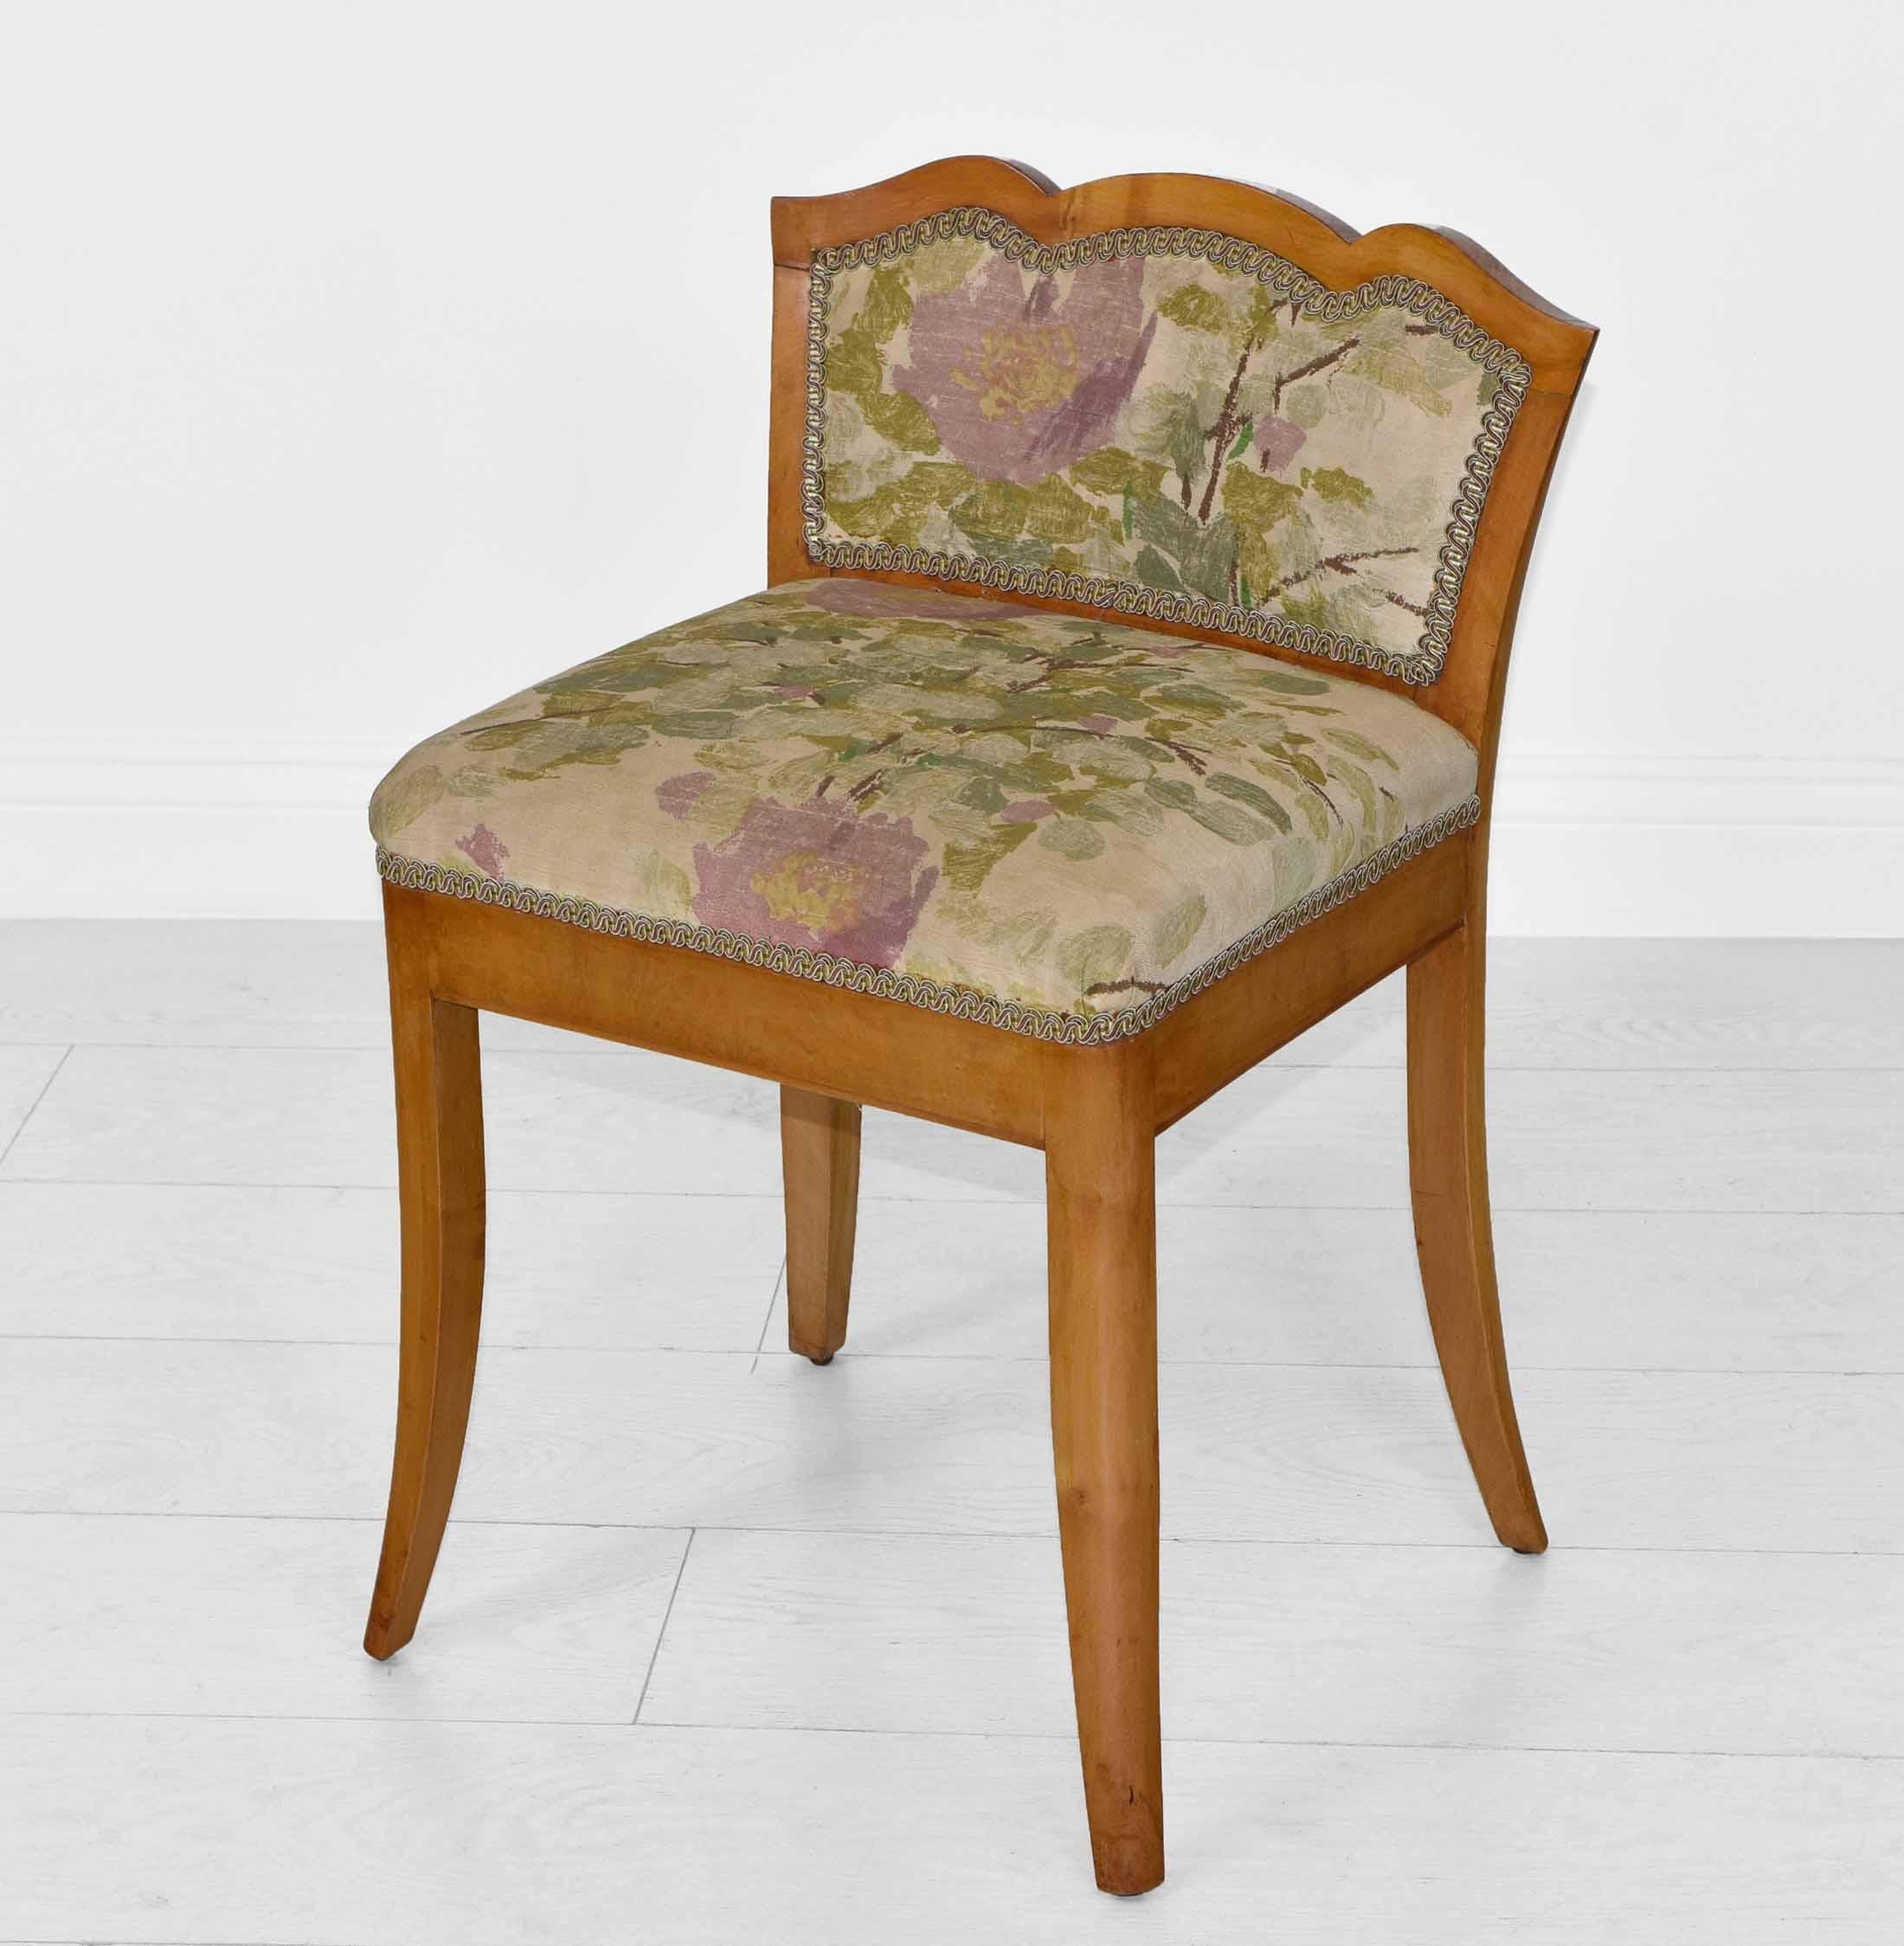 Upholstery English Art Deco Maple Vanity Stool Seat with the Original 1930s Fabric